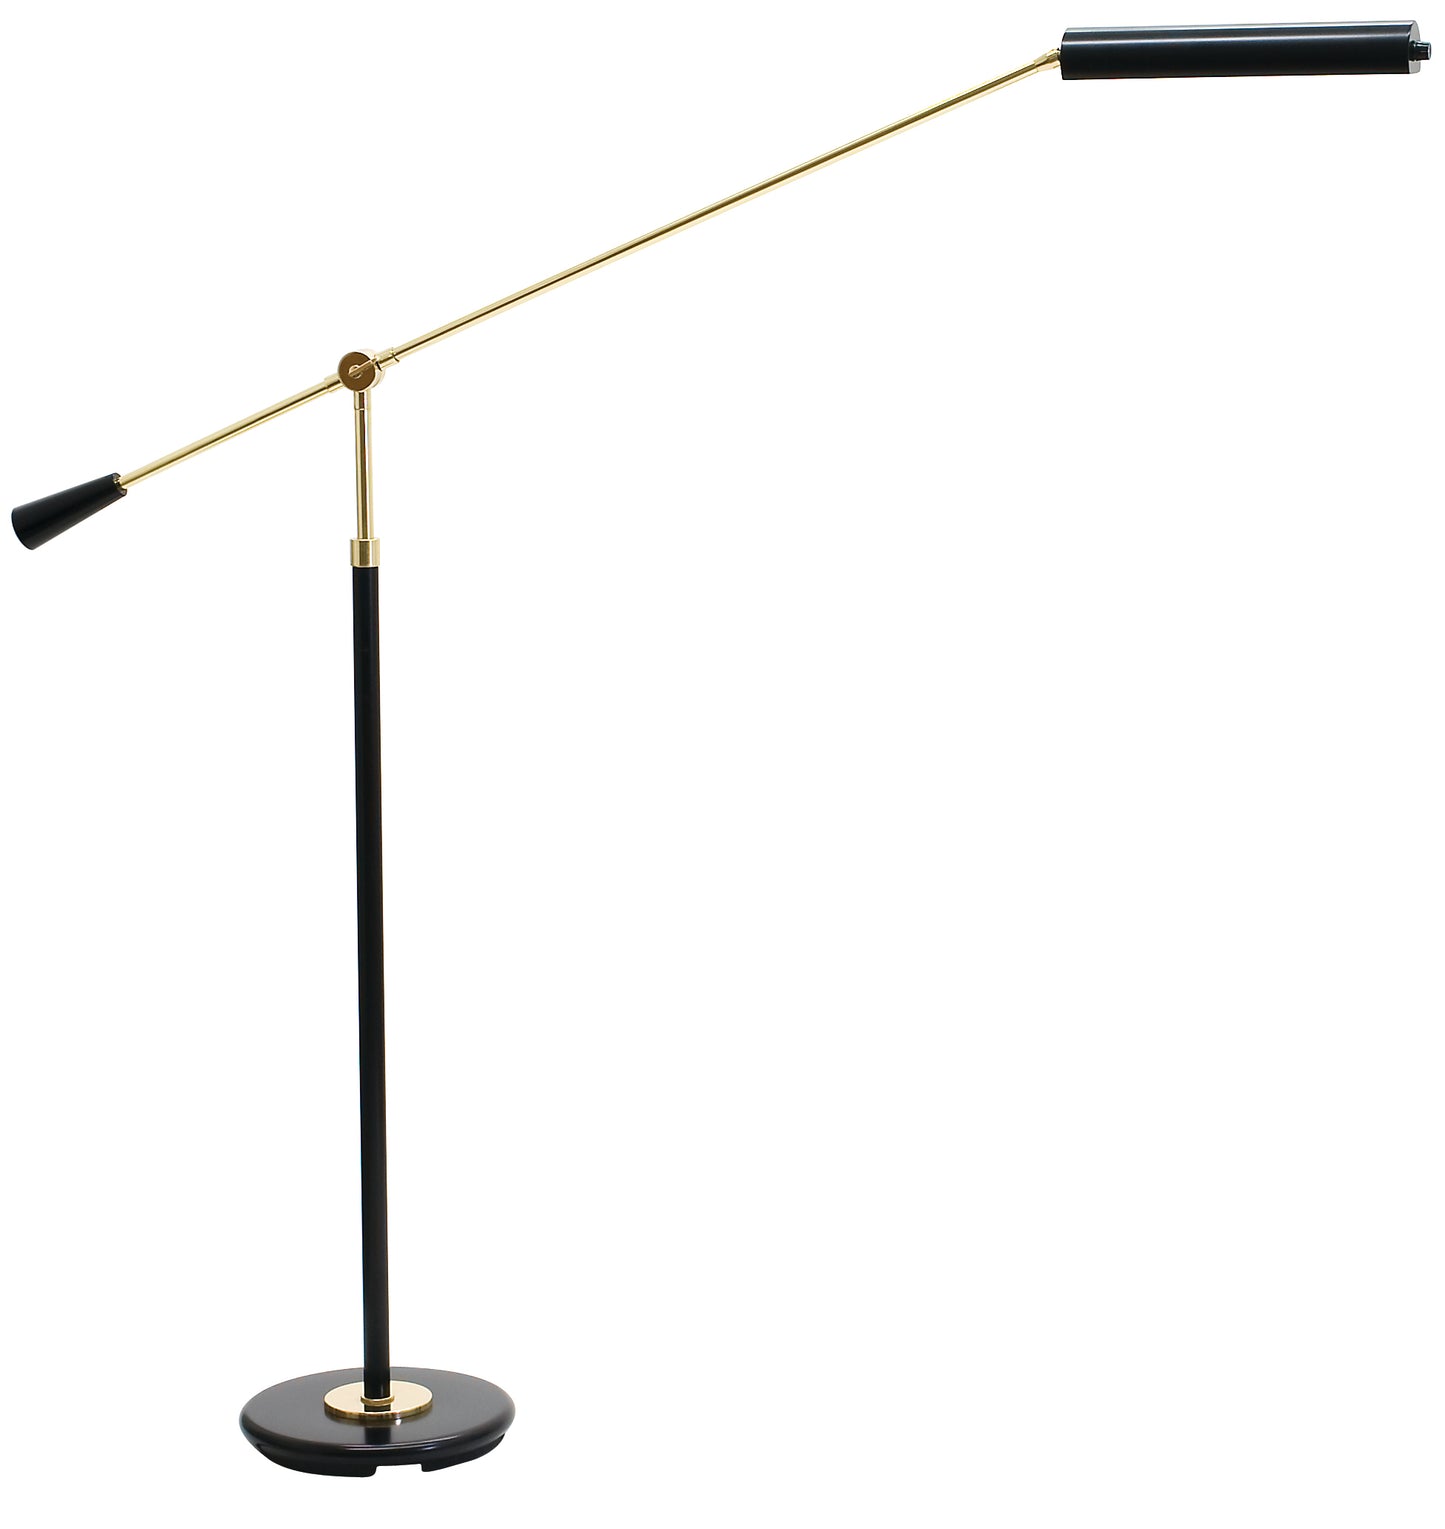 House of Troy Grand Piano Counter Balance LED Floor Lamp in Black with Polished Brass Accents PFLED-617